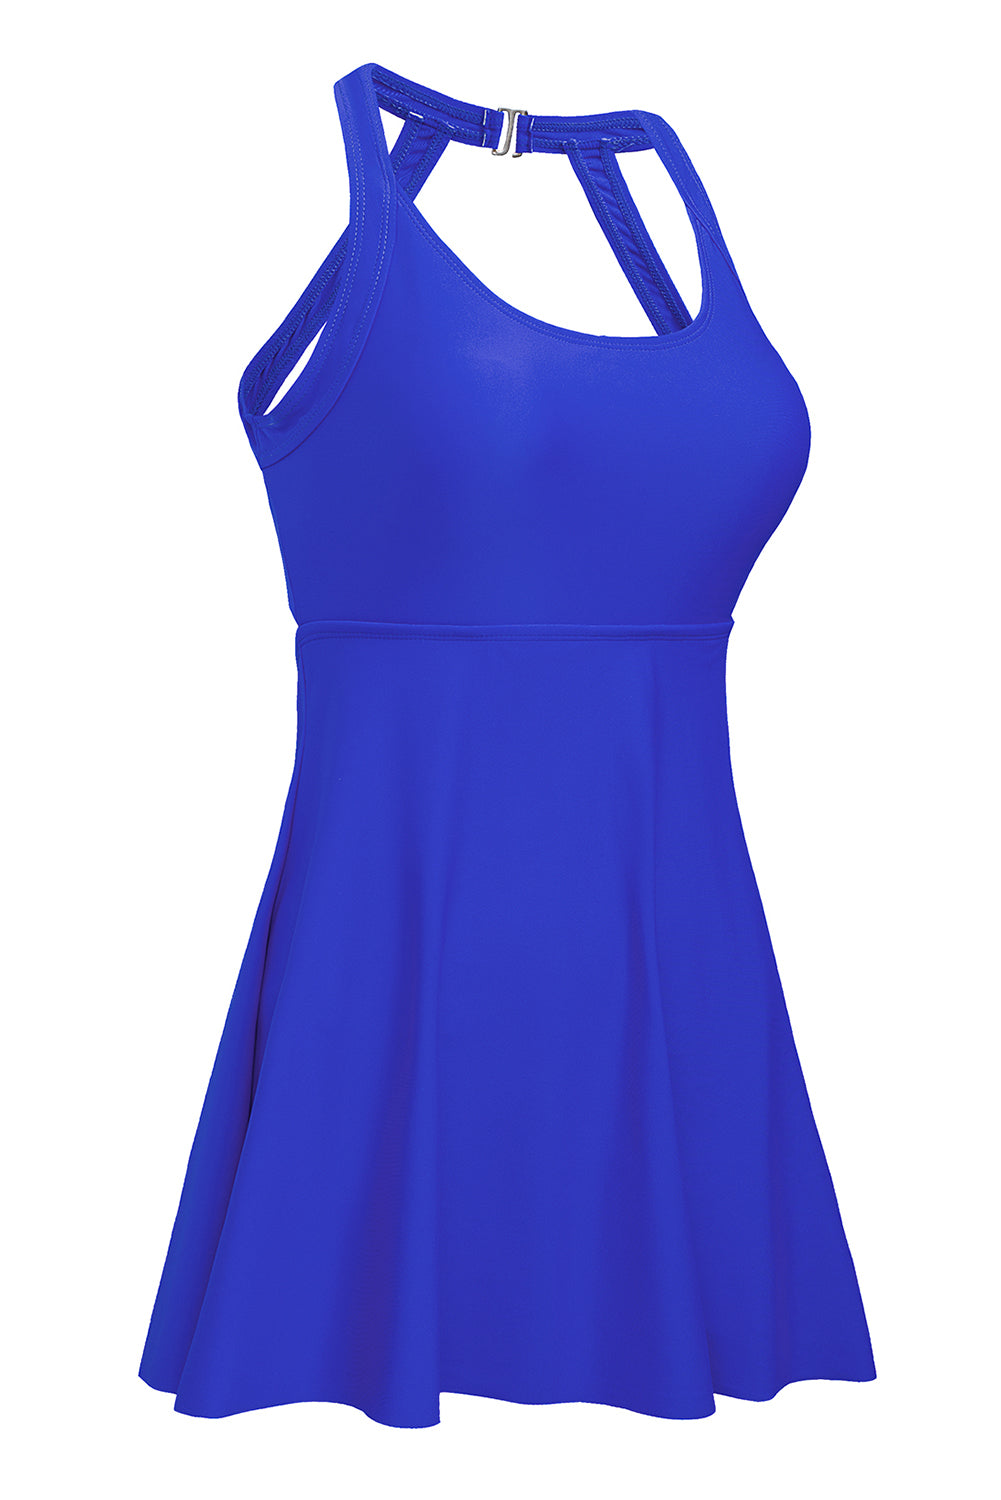 Blue Strappy Halterneck Skirt Style One Piece Swimsuit